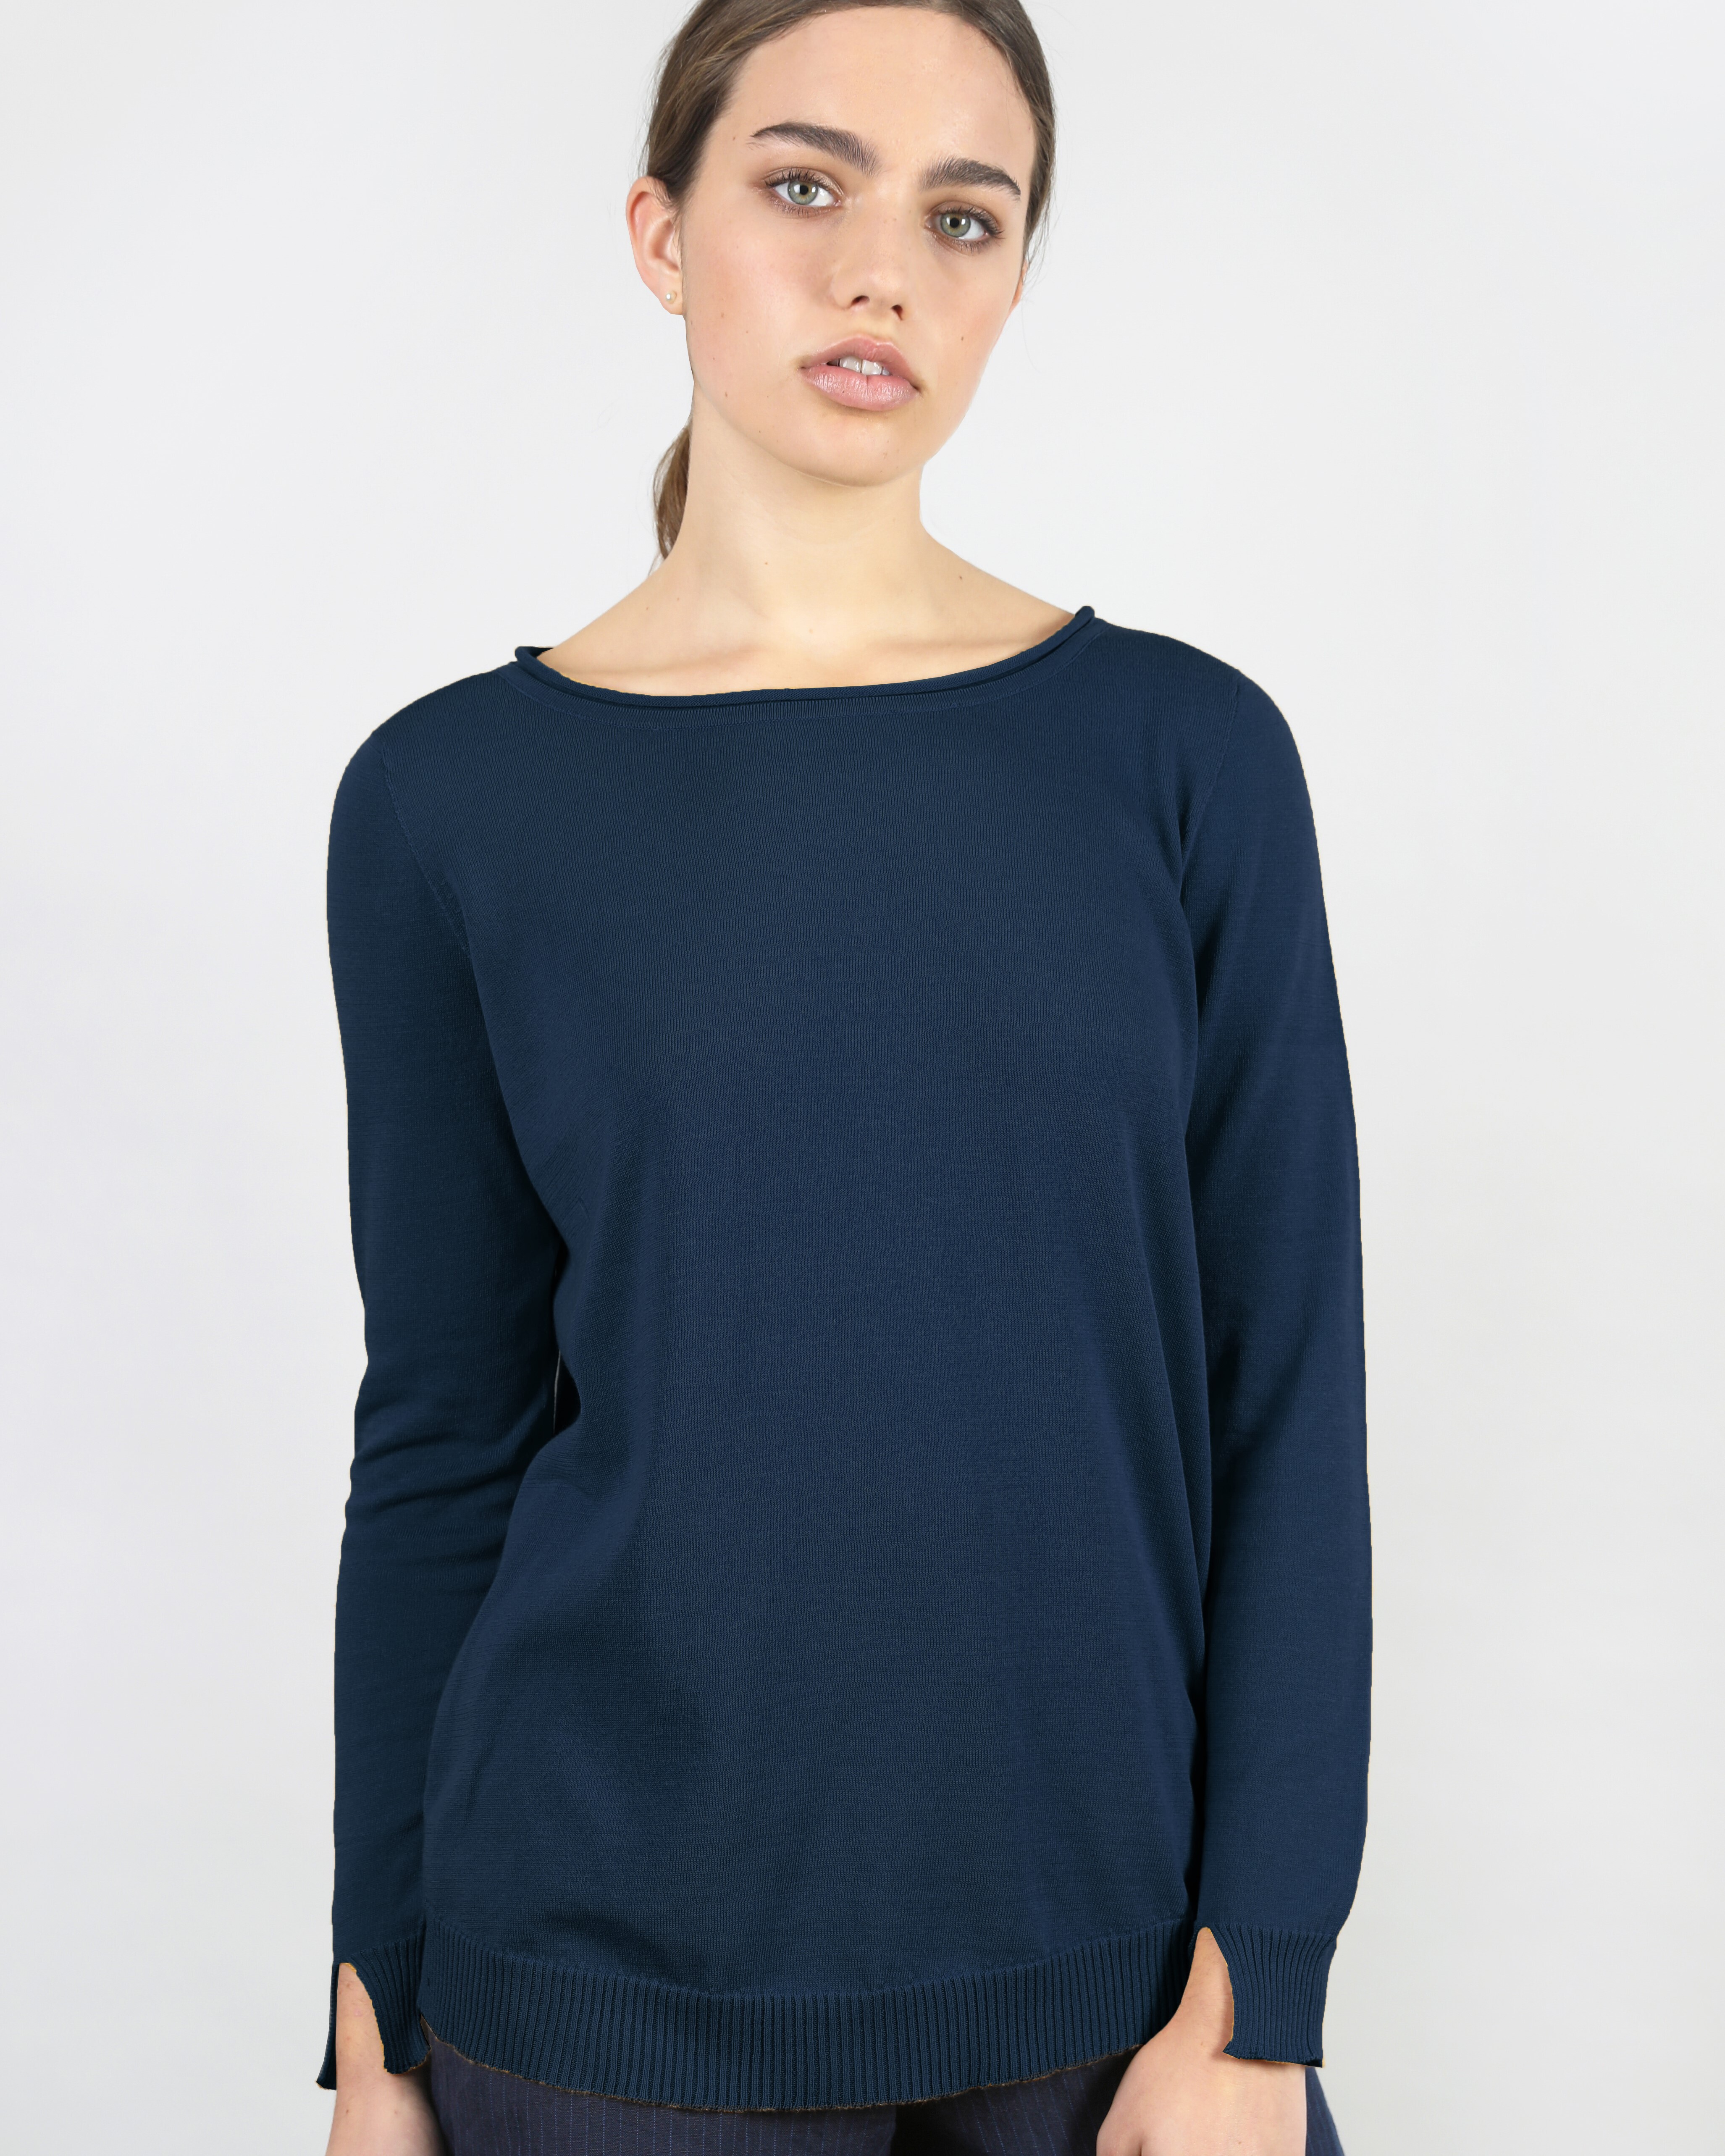 CURVED JUMPER (NAVY)- STANDARD ISSUE SPRING 21 Boxing Day Sale